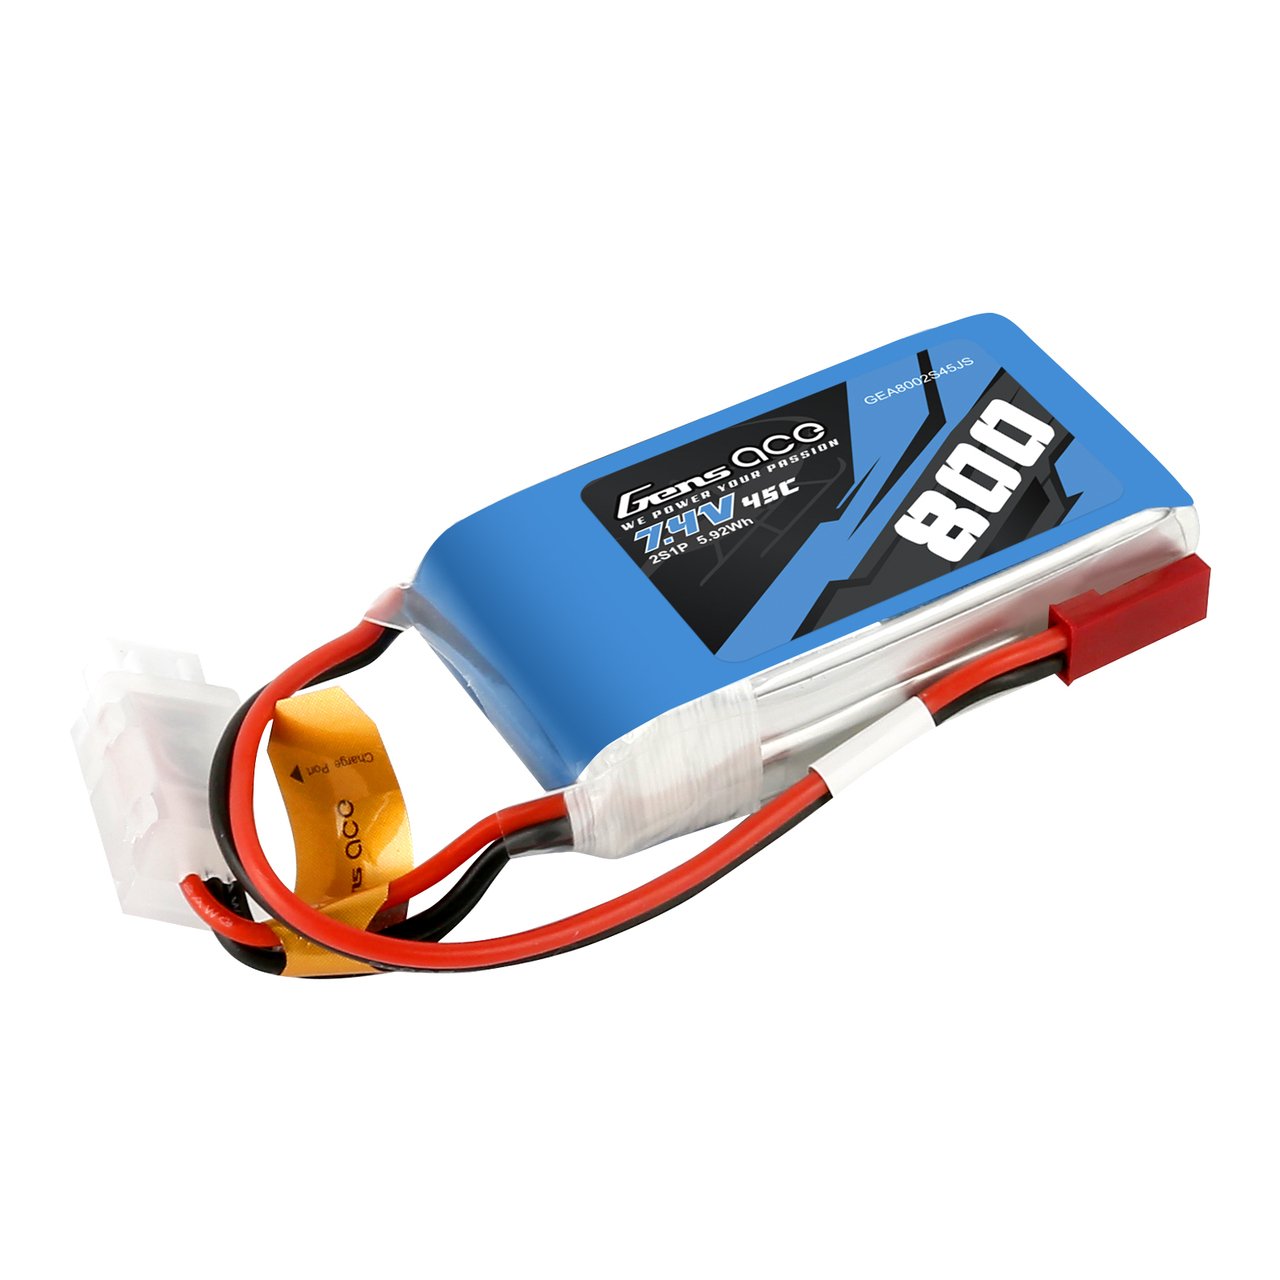 Gens Ace 800mAh 2S 7.4V 45C Lipo Battery Pack With JST-SYP Plug for Axial Scx24 Upgrade